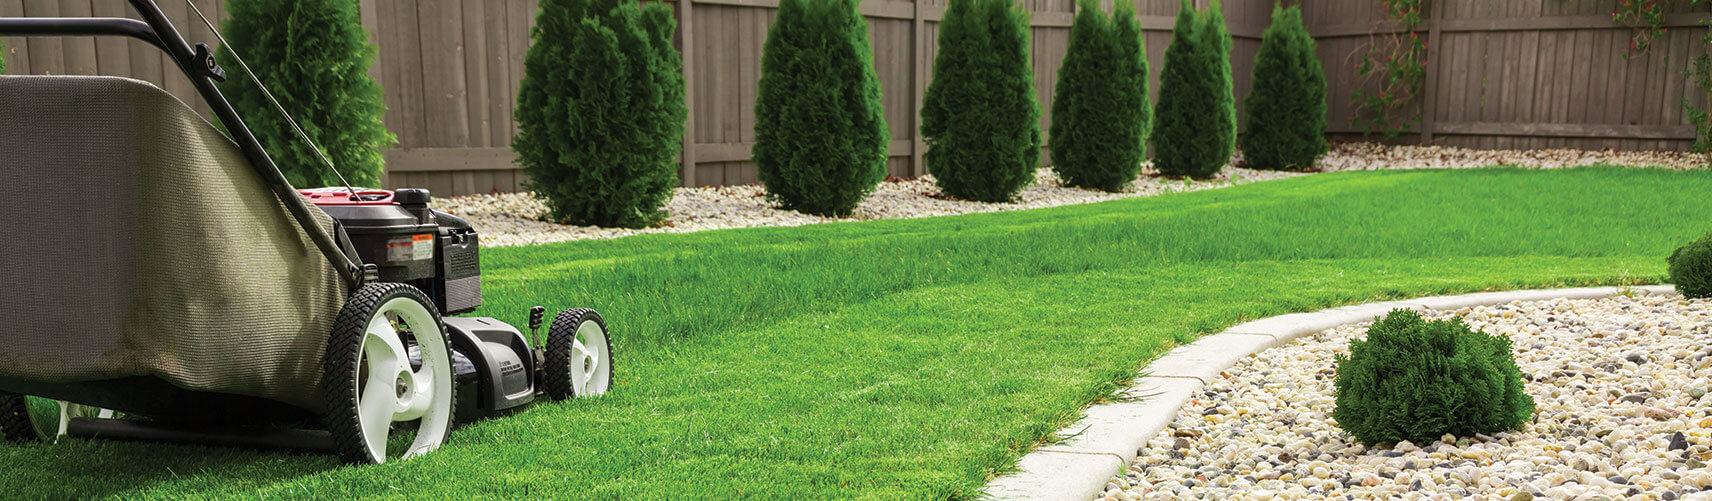 Clearwater Landscaping Company, Landscaper and Lawn Care Services